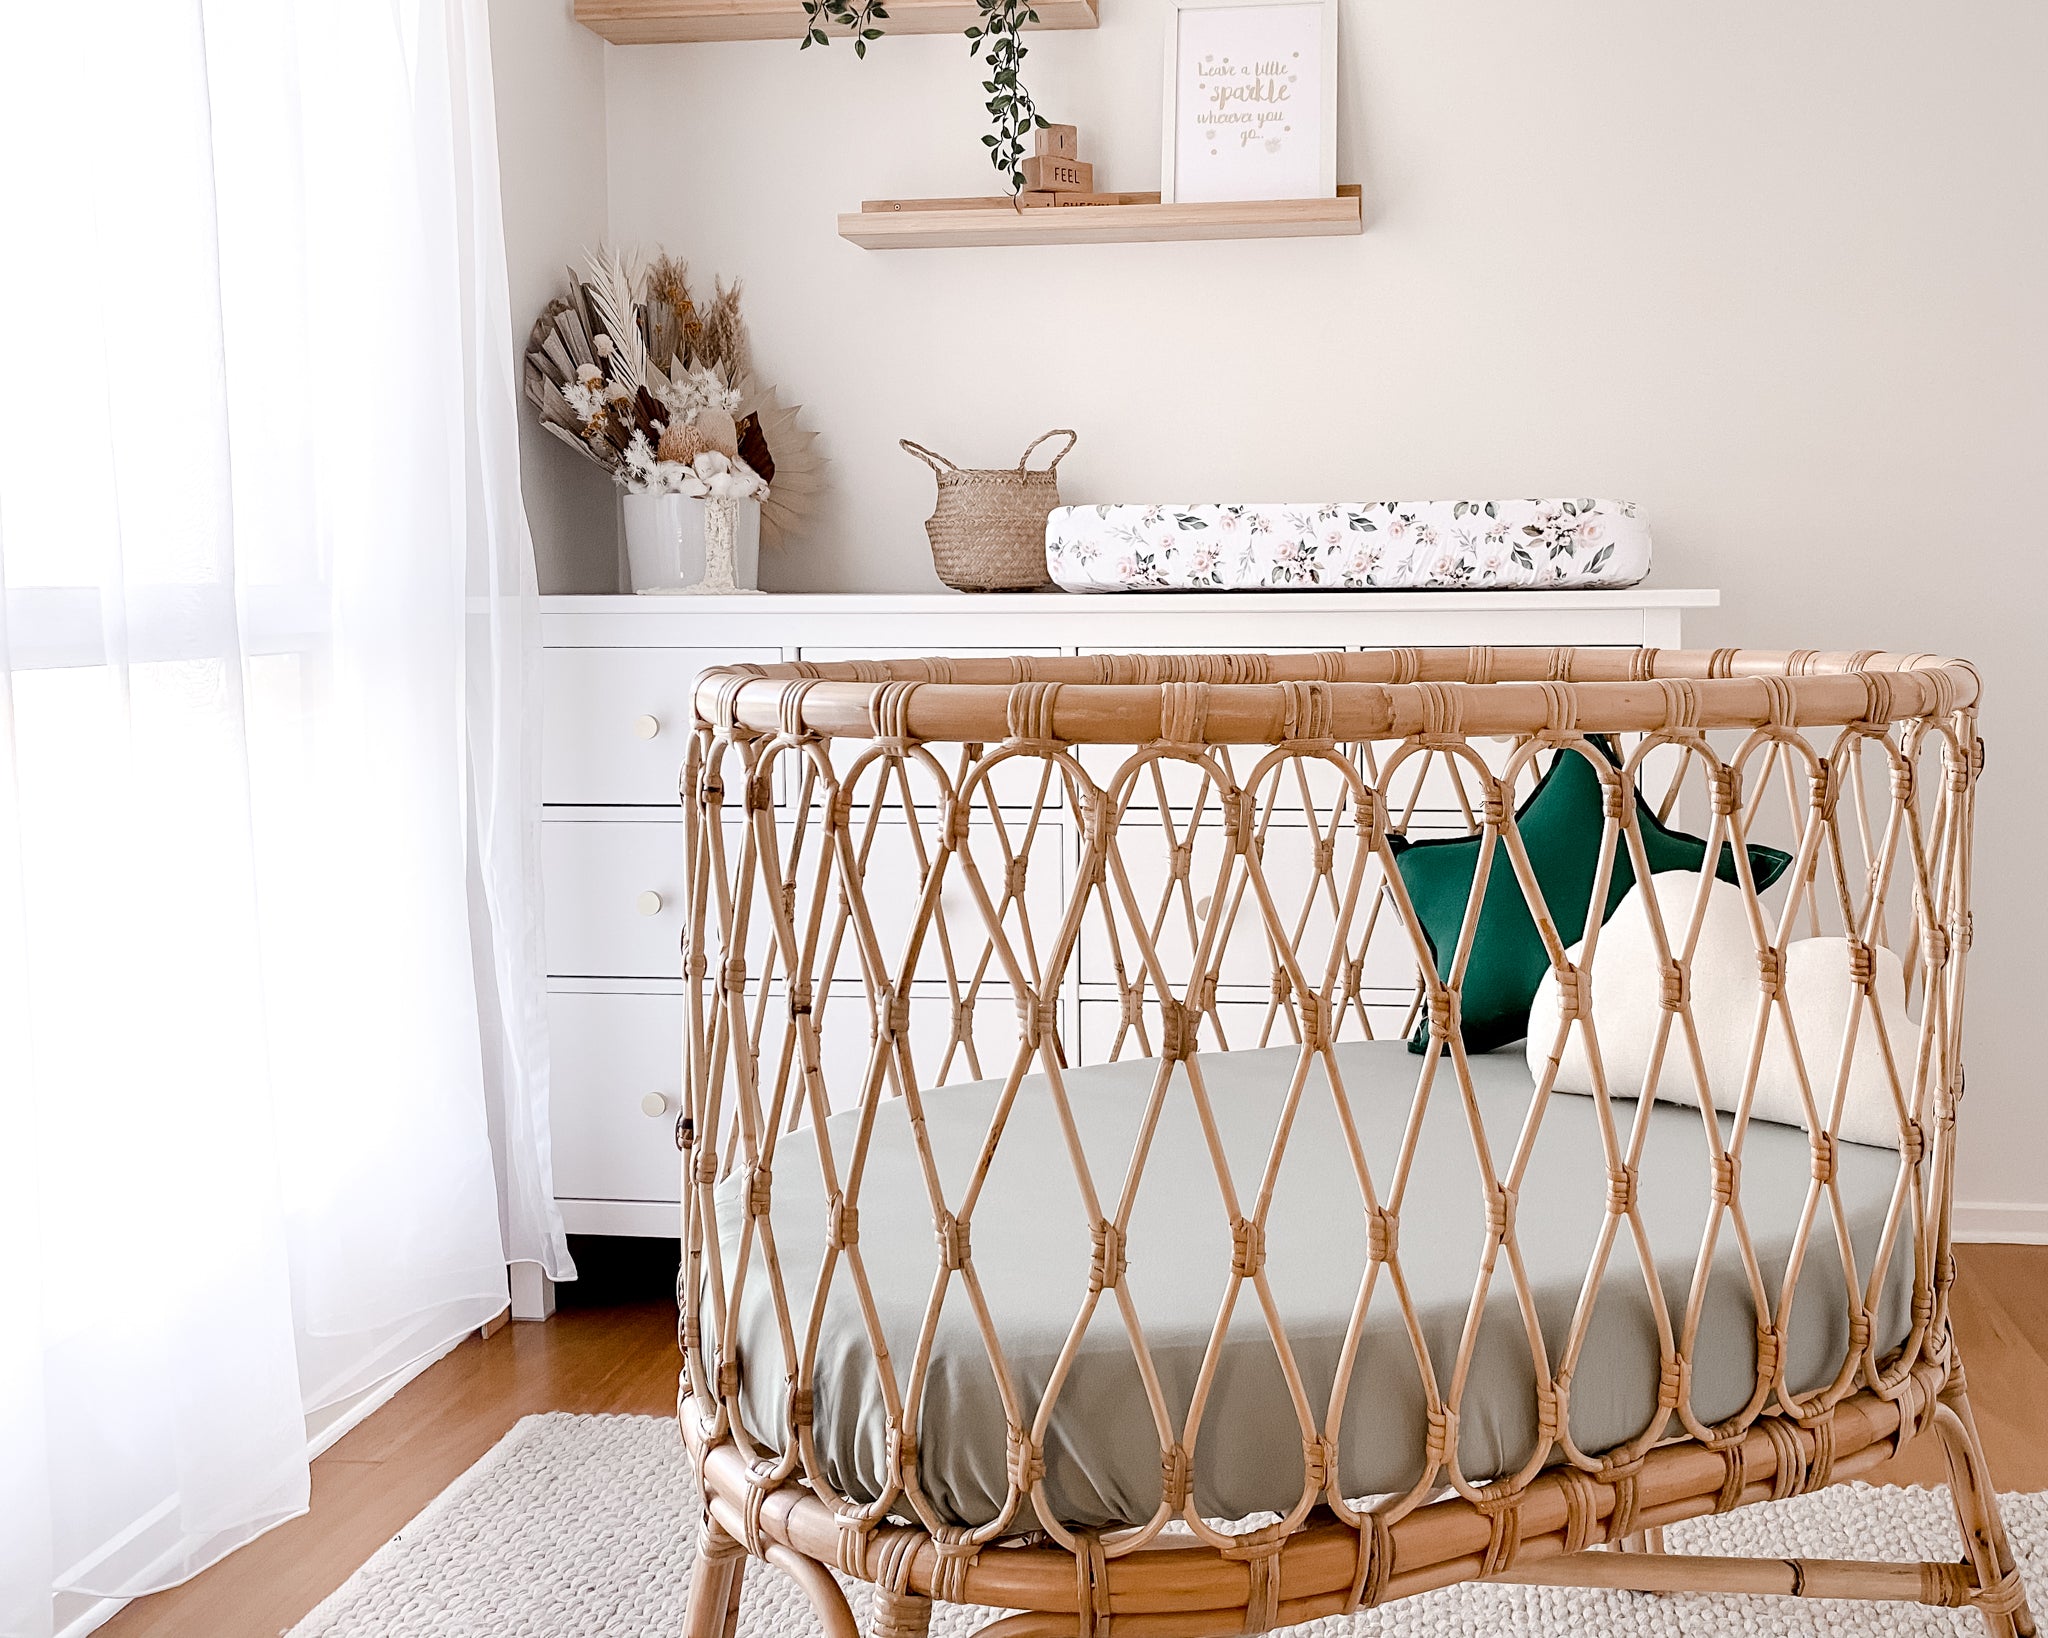 Sage bassinet sheet made from all-natural fibers for a healthy and eco-friendly nursery